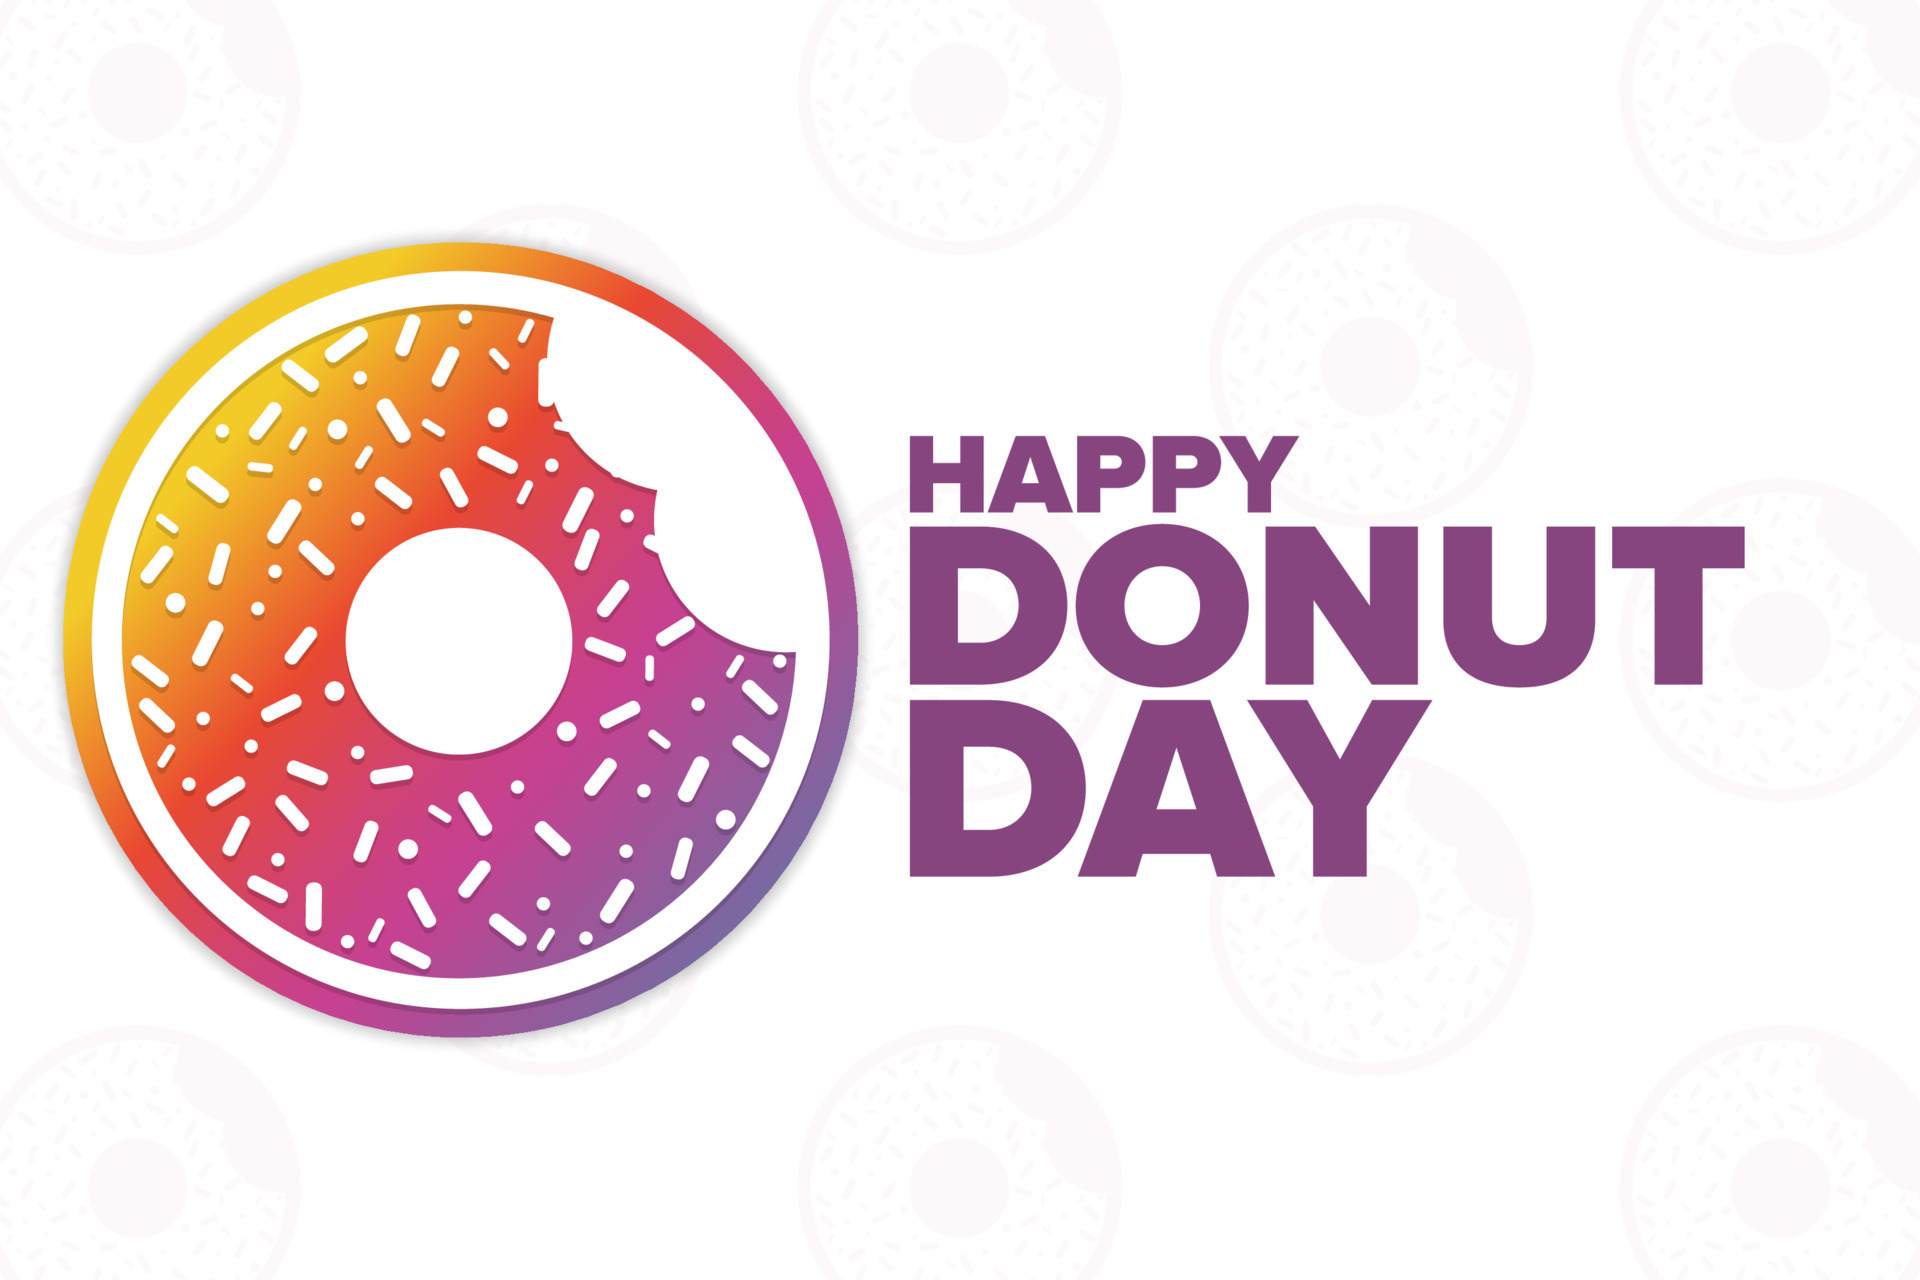 Happy Donut Day. Holiday concept. Template for background, banner, card